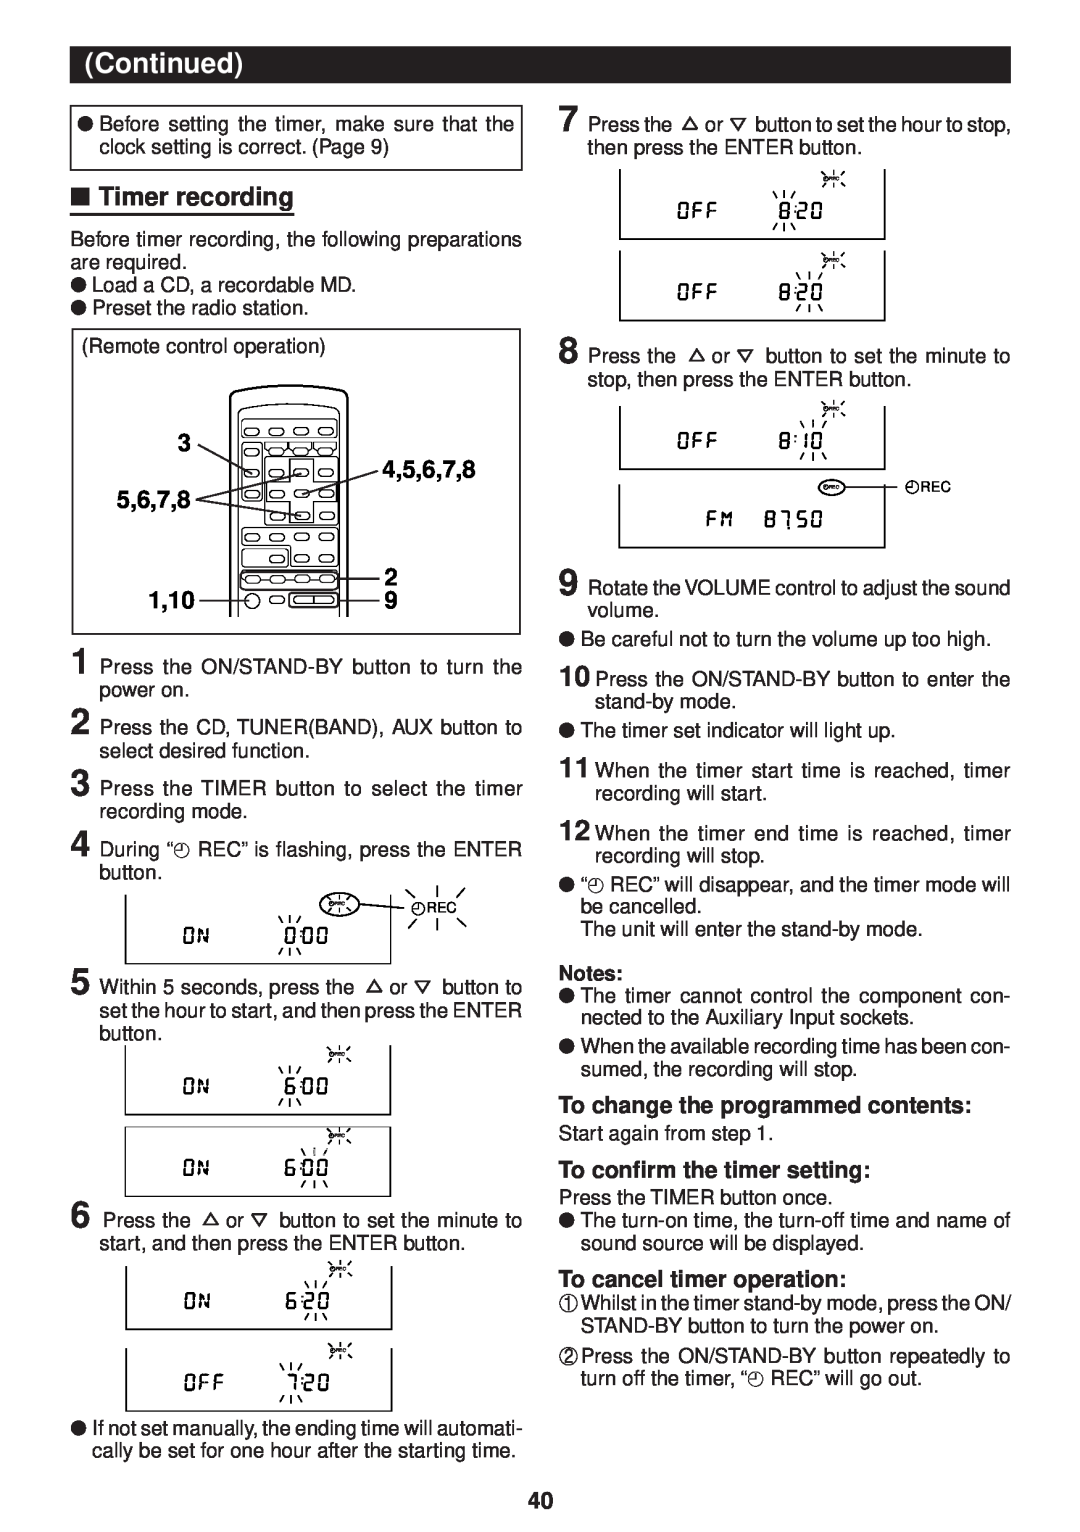 Sharp MD-M3H operation manual Timer recording, Continued, 3 4,5,6,7,8 5,6,7,8, 1,10, To change the programmed contents 